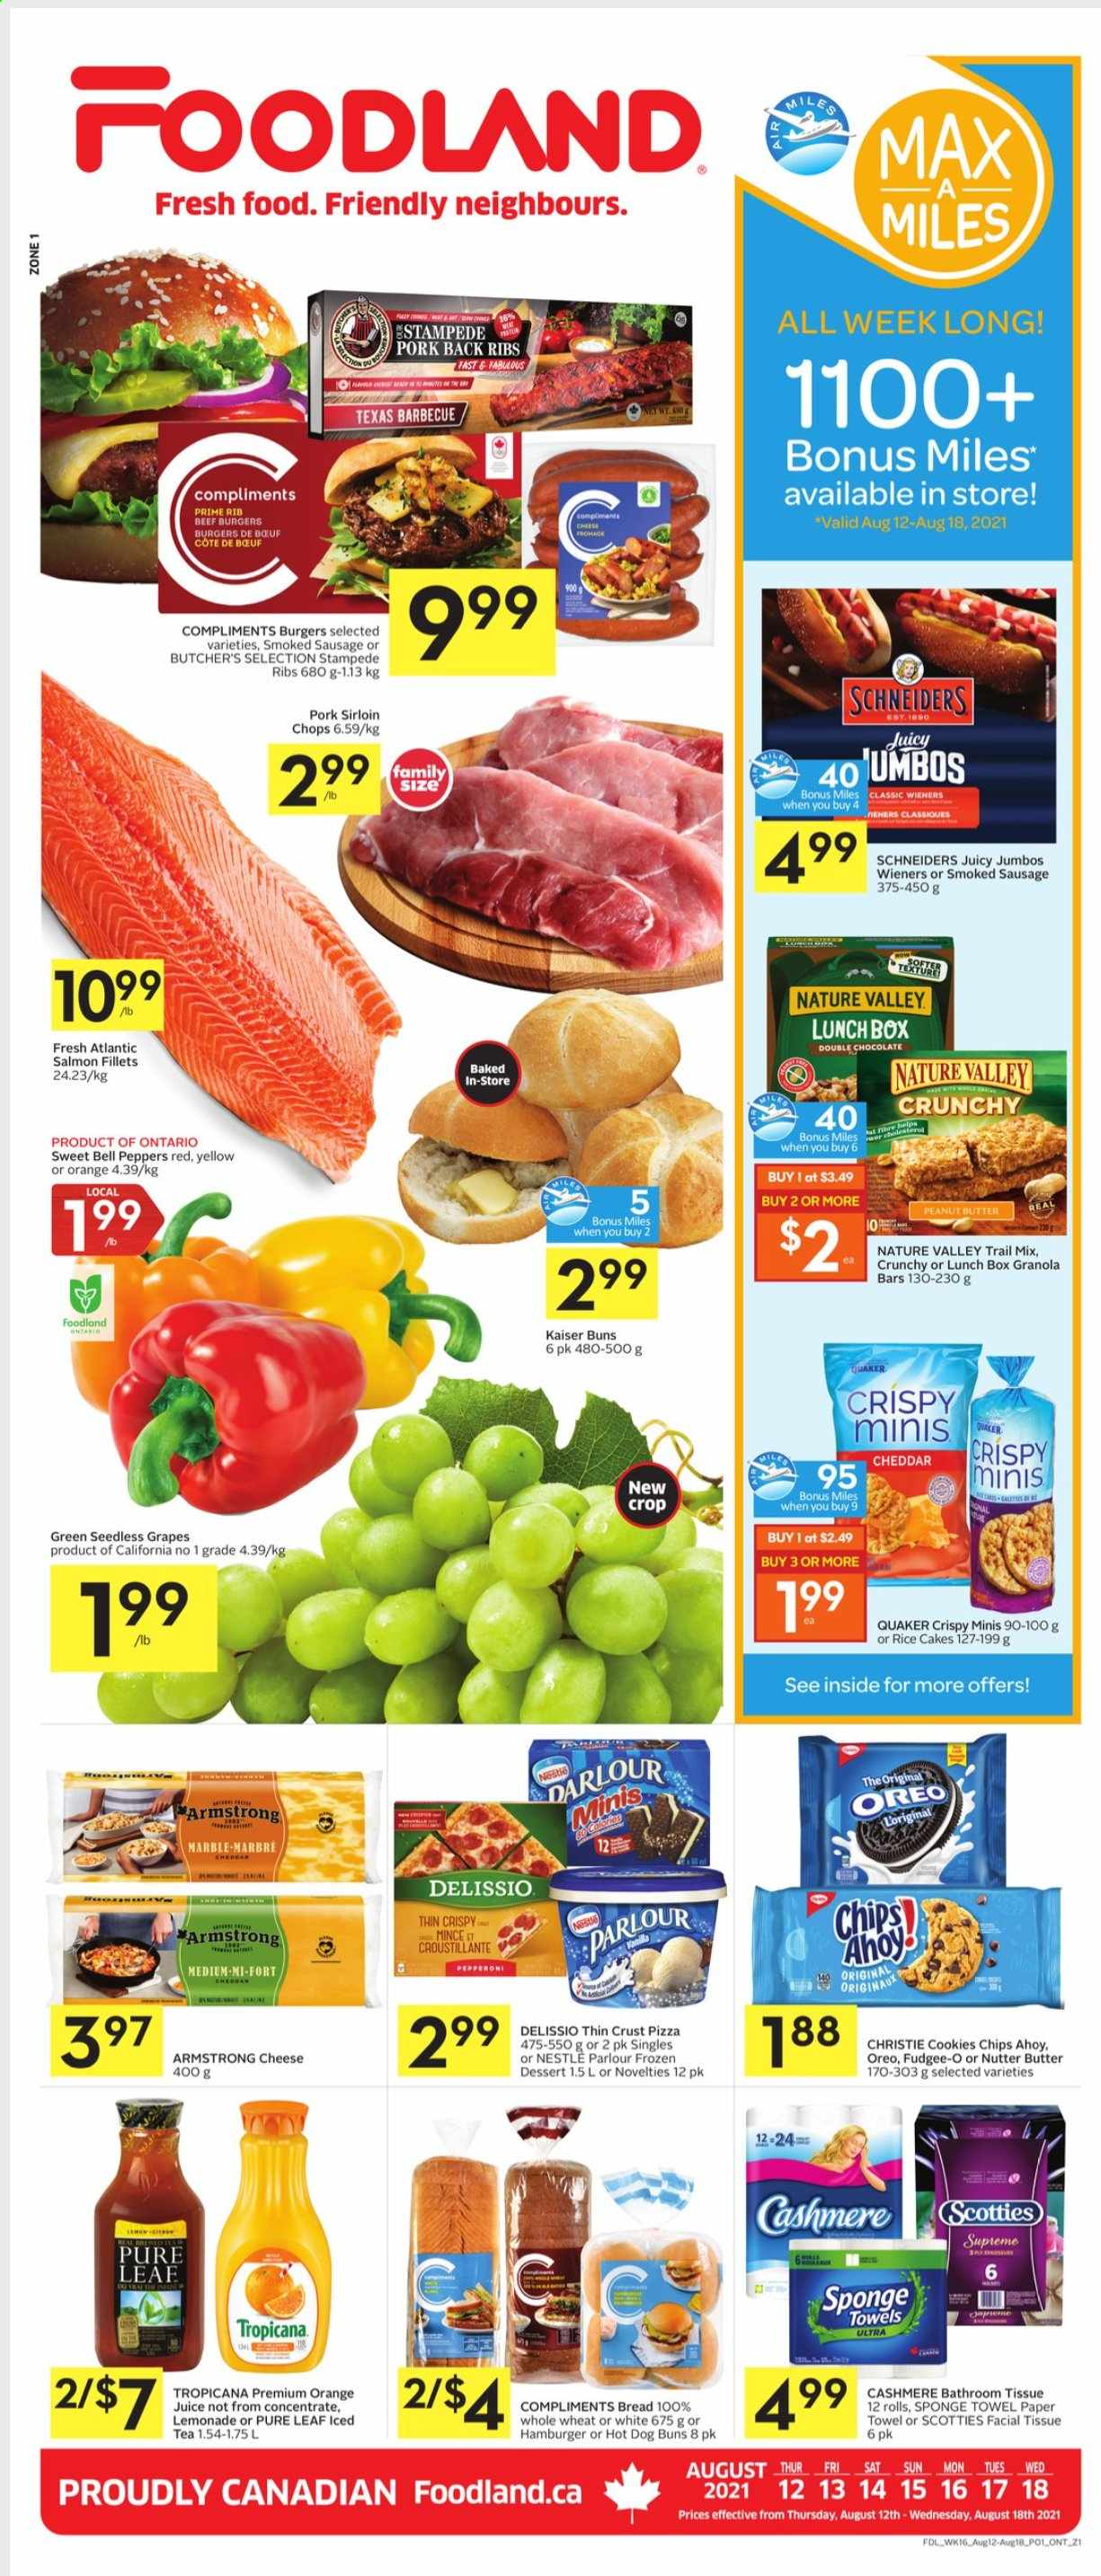 thumbnail - Foodland Flyer - August 12, 2021 - August 18, 2021 - Sales products - bread, buns, bell peppers, peppers, grapes, seedless grapes, salmon, salmon fillet, pizza, Quaker, beef burger, sausage, smoked sausage, pepperoni, cookies, chocolate, granola bar, Nature Valley, peanut butter, trail mix, lemonade, orange juice, juice, ice tea, Pure Leaf, pork loin, pork meat, pork ribs, pork back ribs, Oreo, Nestlé. Page 1.